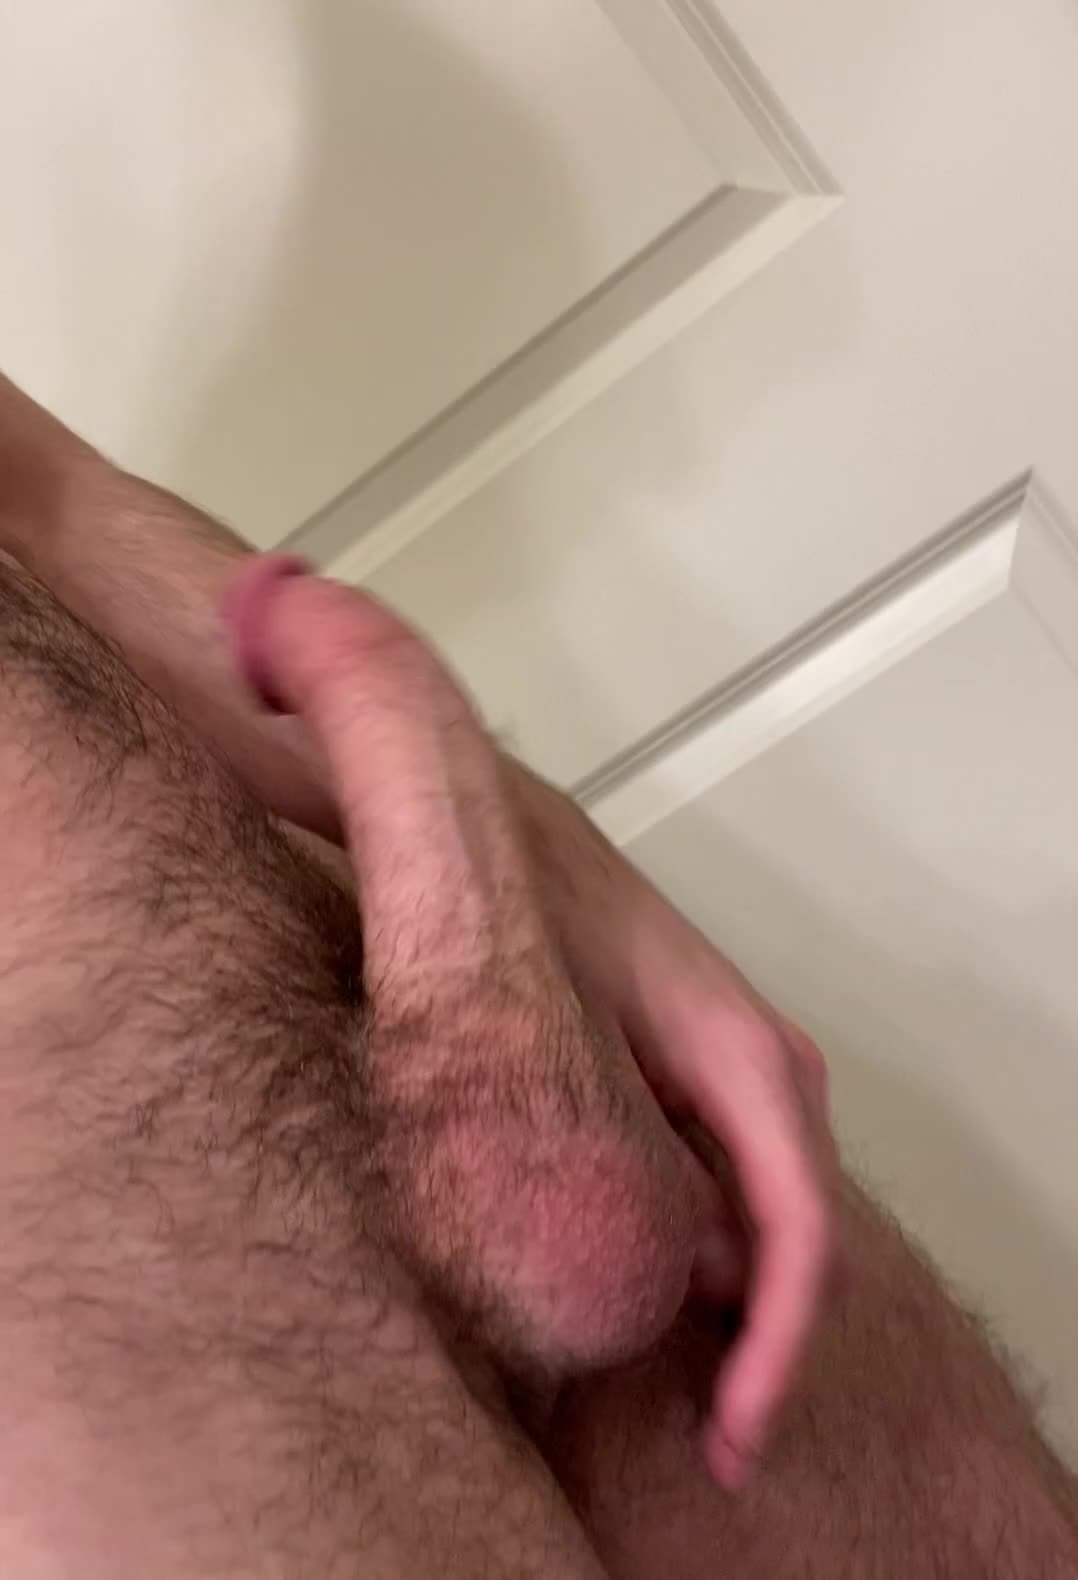 Video post by Harry Buttcrack